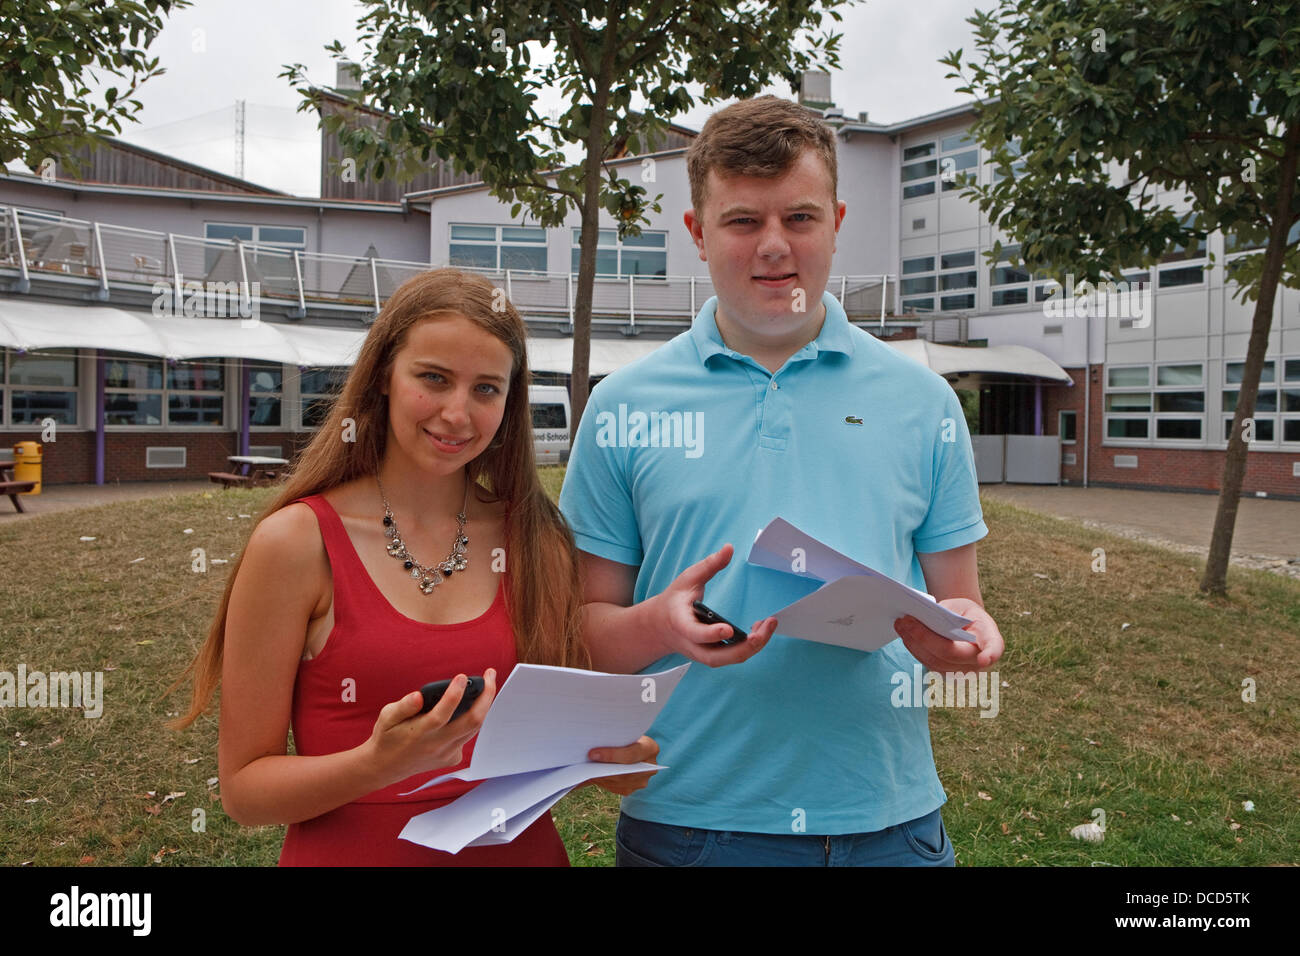 Bromley, Kent, UK.15th August 2013.  A Level Students James Moore & Joanna Bannister, Leading the way was Business and Marketing student James Moore who secured two A*s and one B grade they are both from Bishop Justus schoo Credit: Keith Larby/Alamy live News Stock Photo